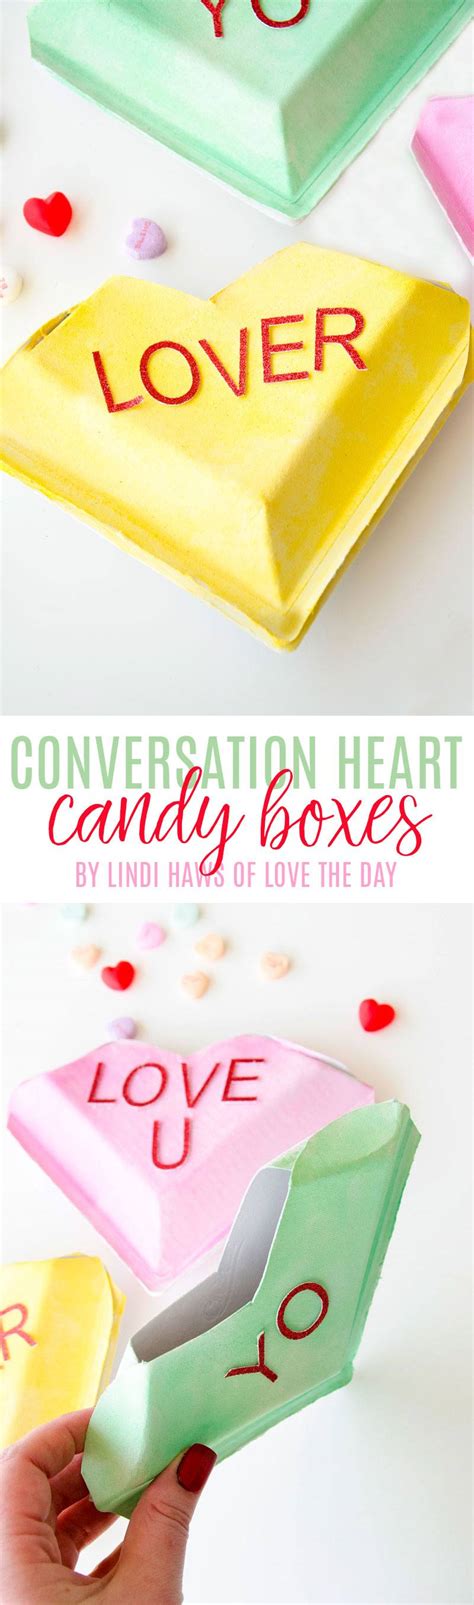 Make Your Own Conversation Hearts Candy Boxes By Lindi Haws Of Love The Day